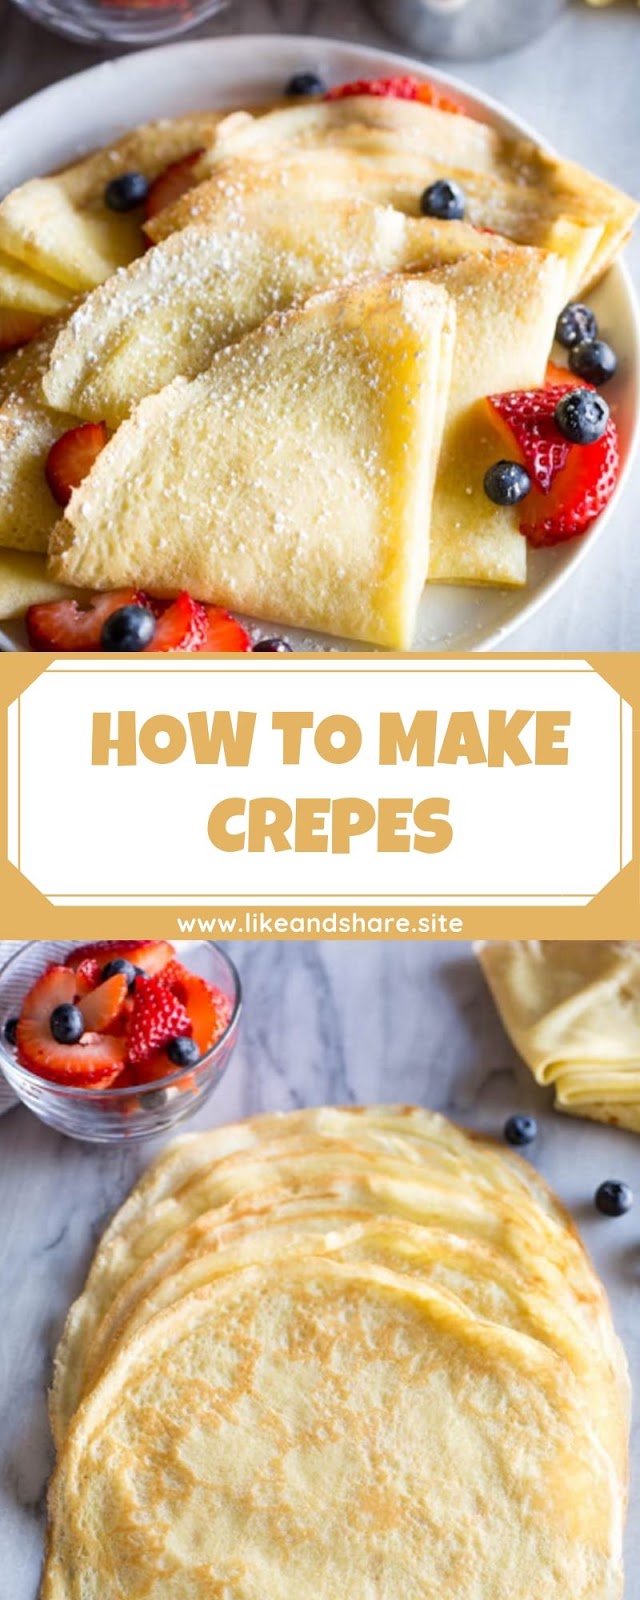 HOW TO MAKE CREPES